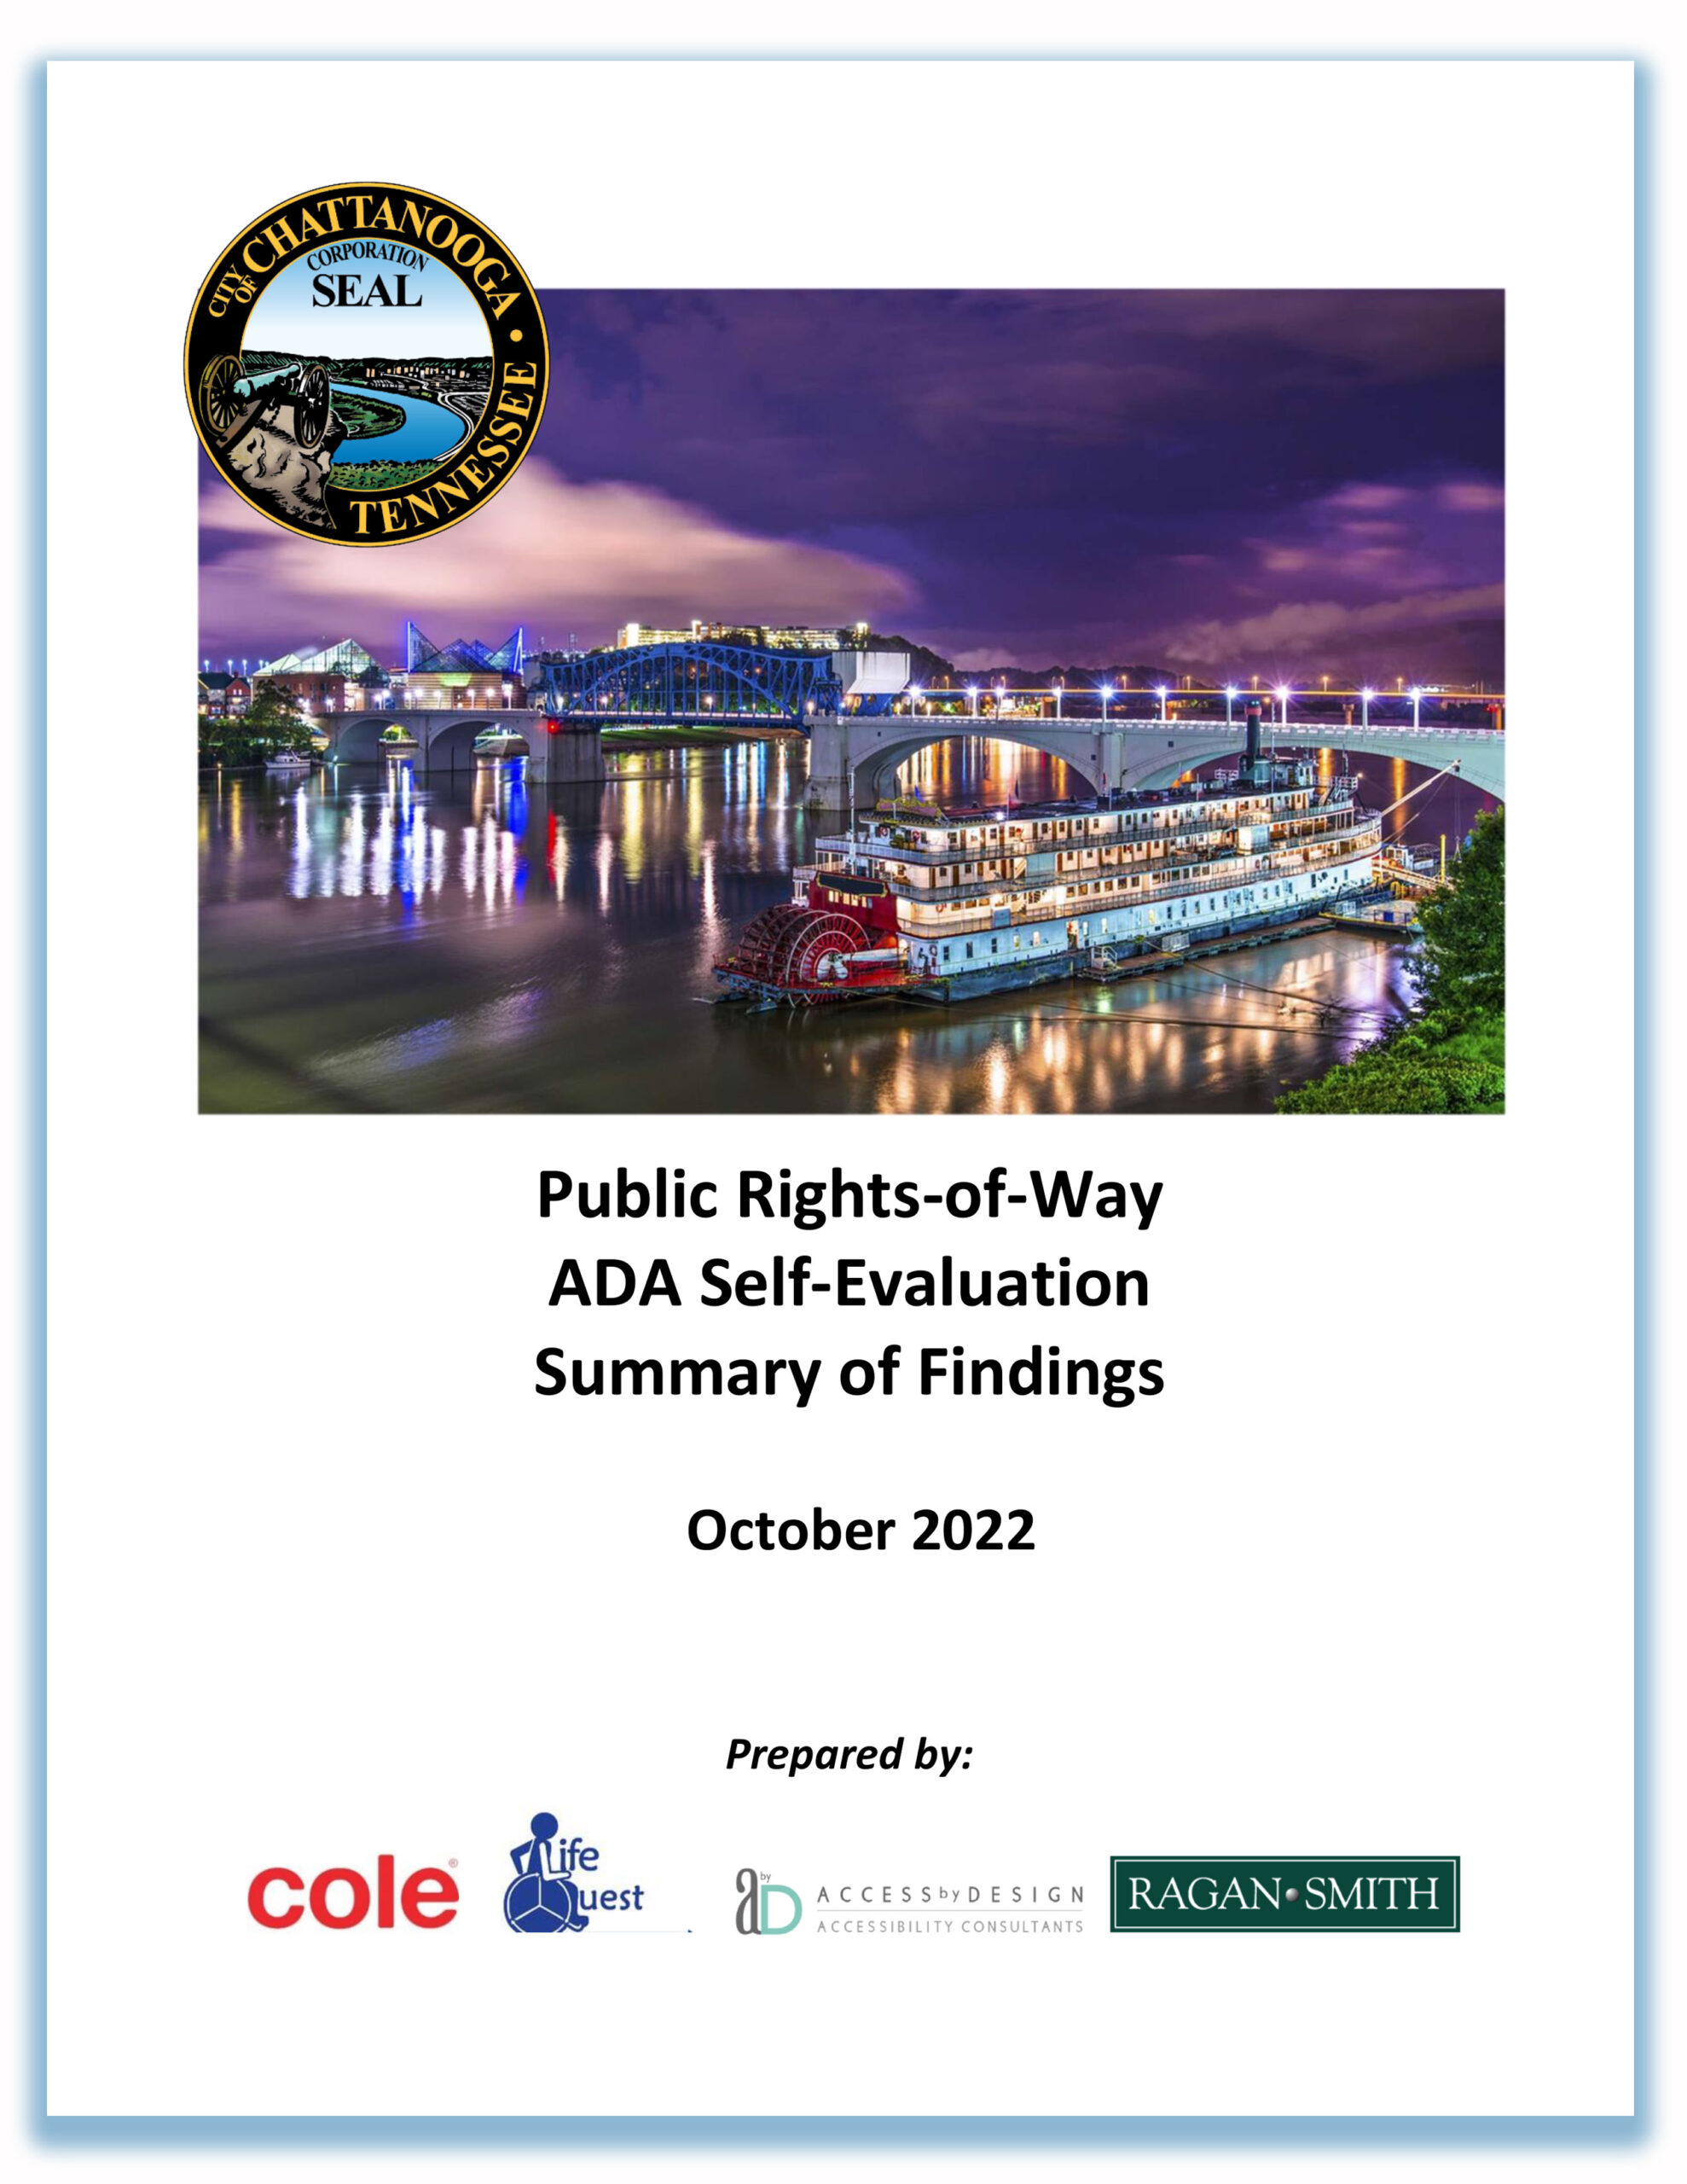 City of Chattanooga Public Rights-of-Ways ADA Self-Evaluation